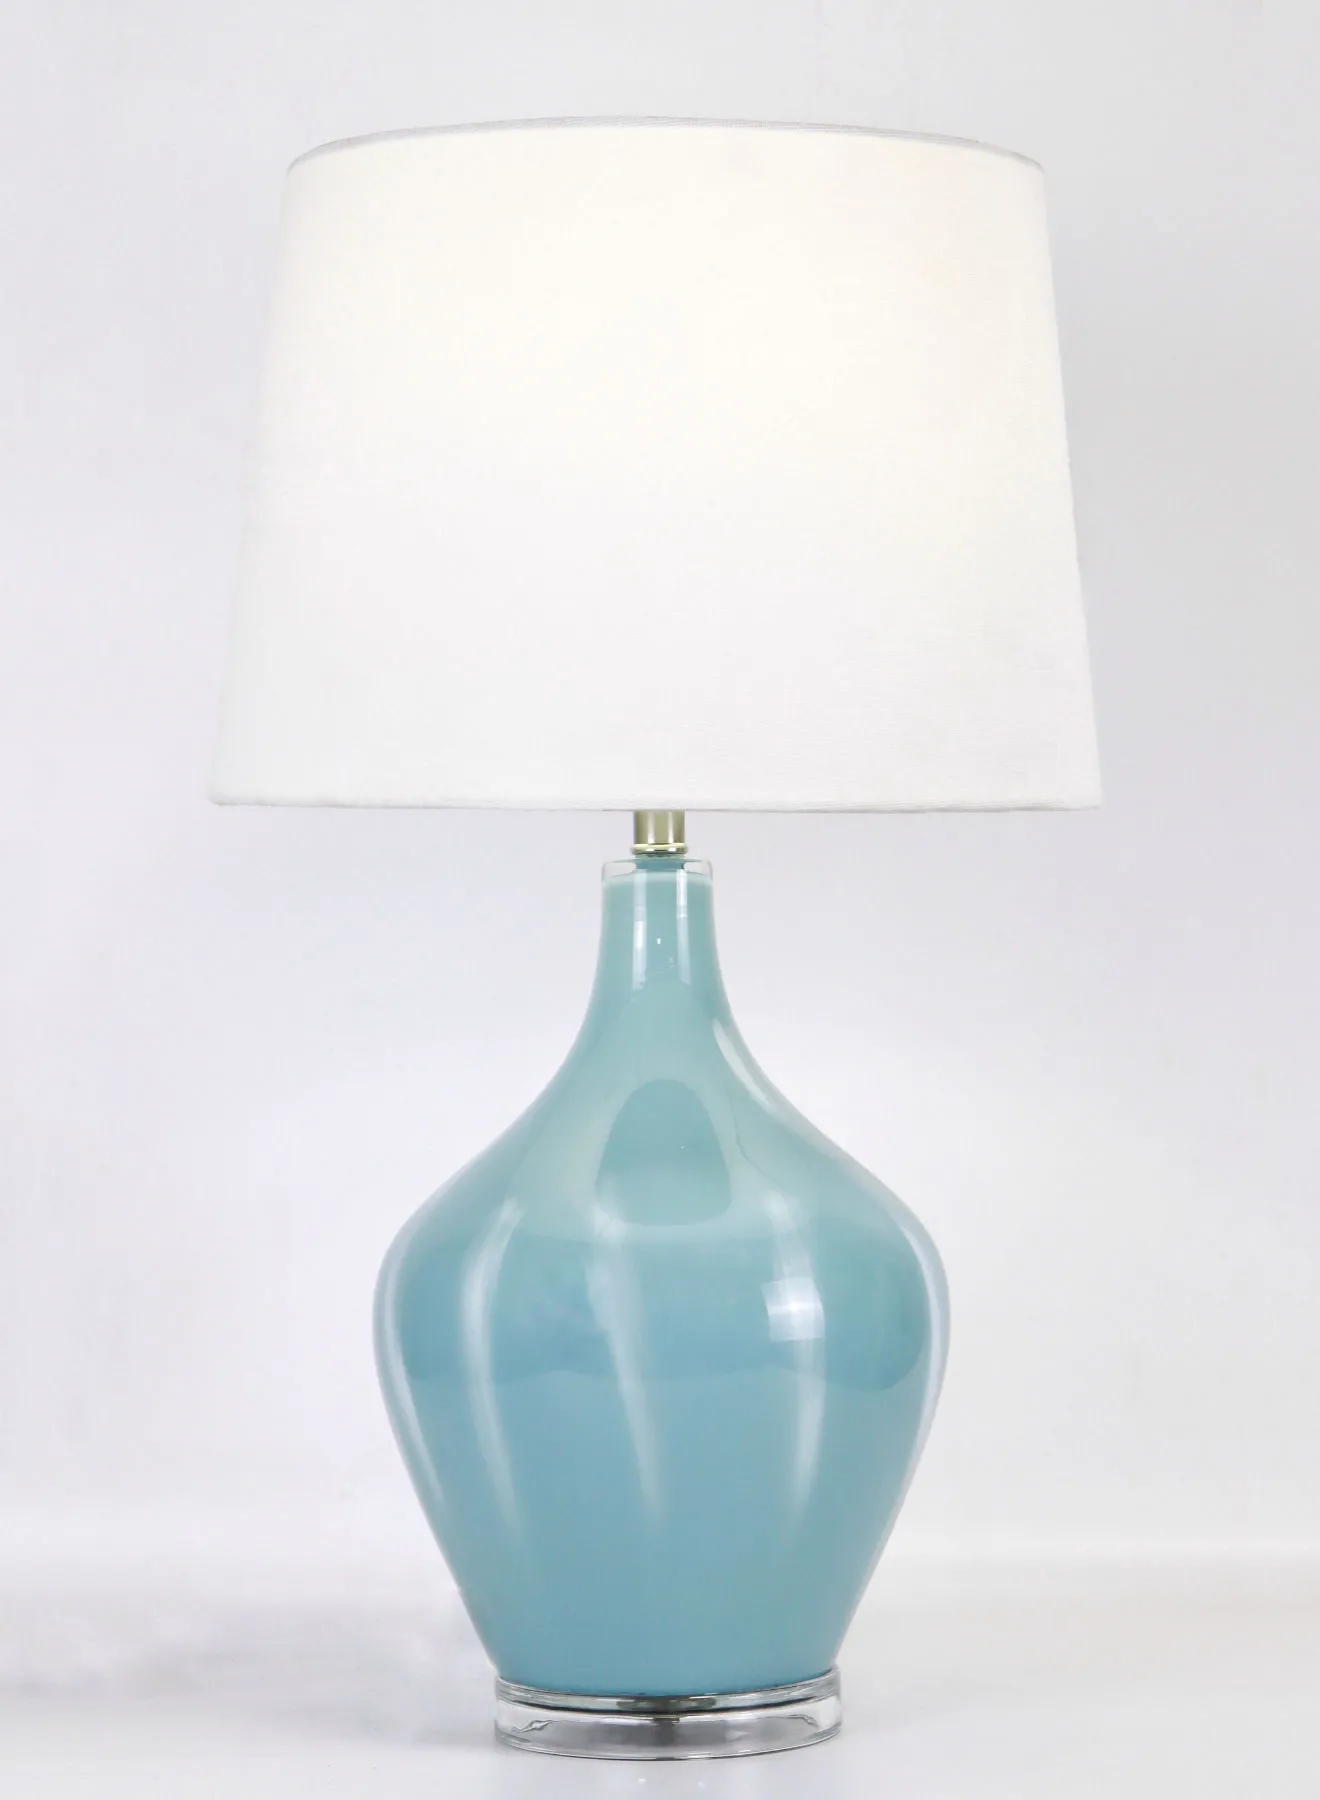 ebb & flow Modern Design Glass Table Lamp Unique Luxury Quality Material for the Perfect Stylish Home RSN71042 Blue 13 x 23